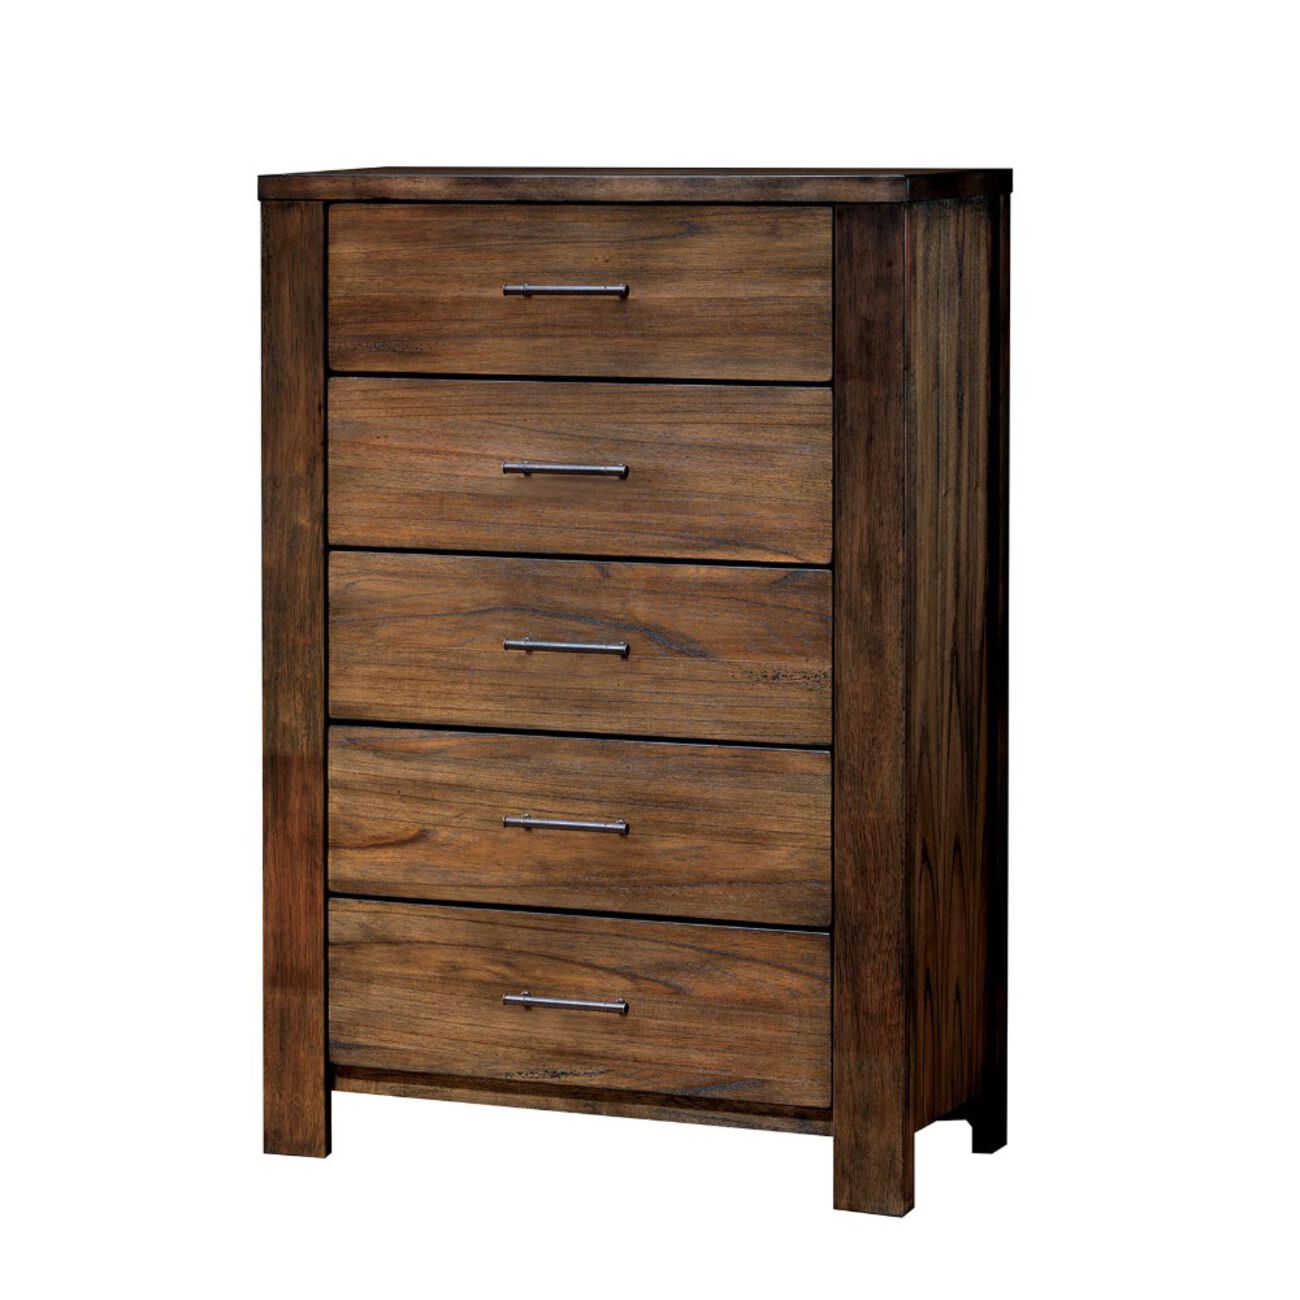 Transitional Style Wooden Chest With Metal Handle Pulls, Brown